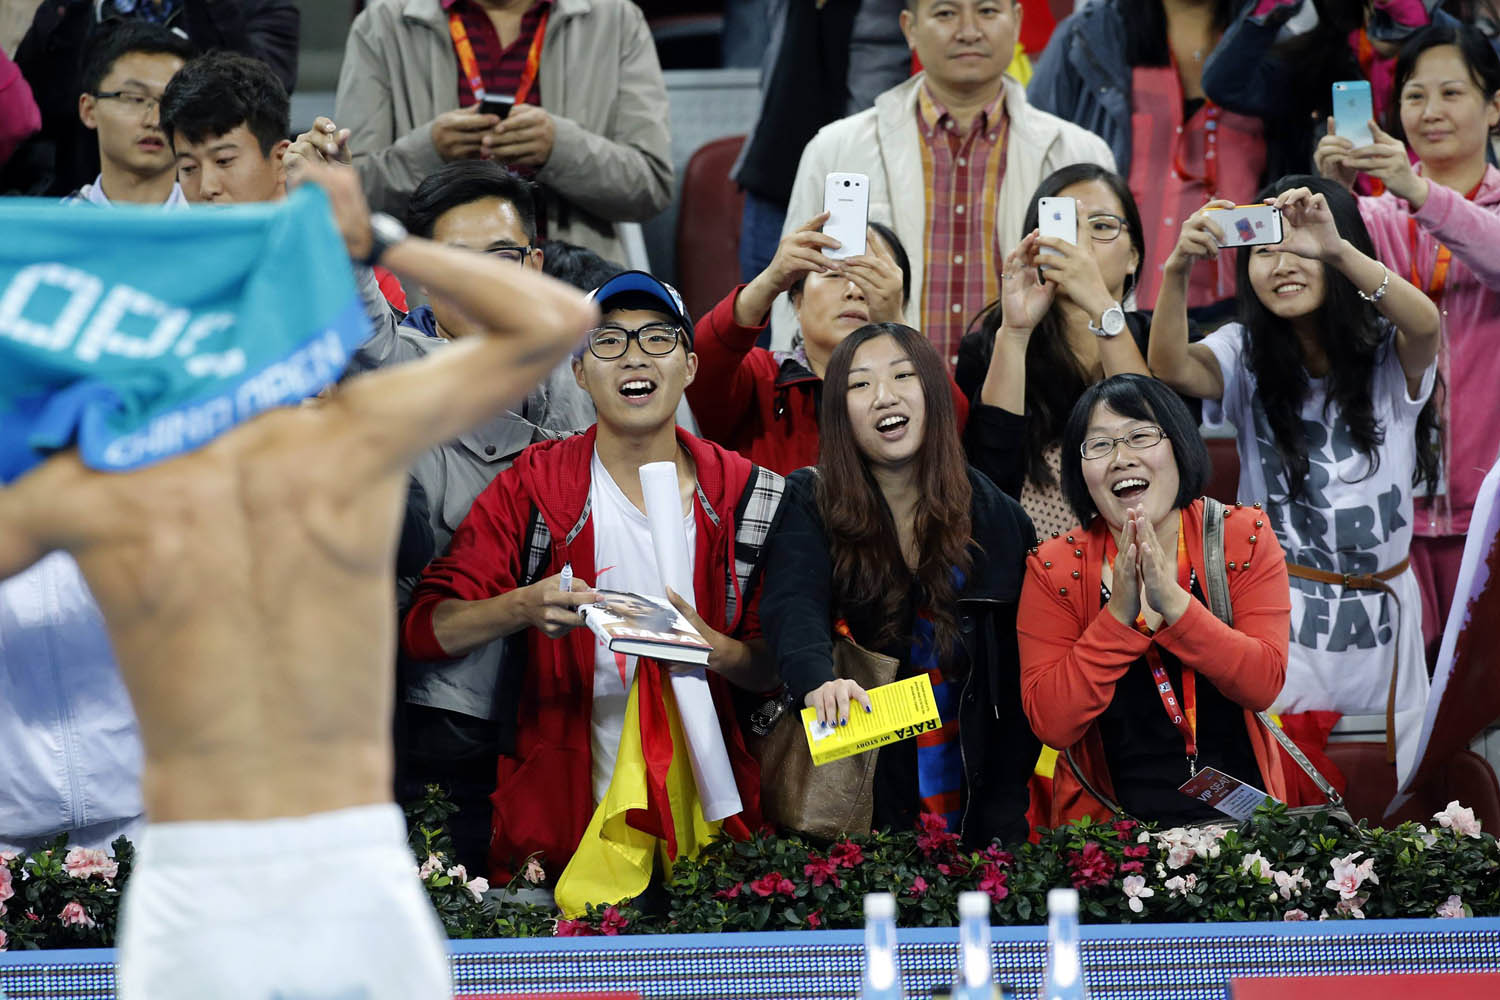 Oct. 2, 2013. Fans watch Spain's Rafael Nadal change his shirt after he defeated Philipp Kohlschreiber of Germany in their match at the China Open tennis tournament in Beijing.